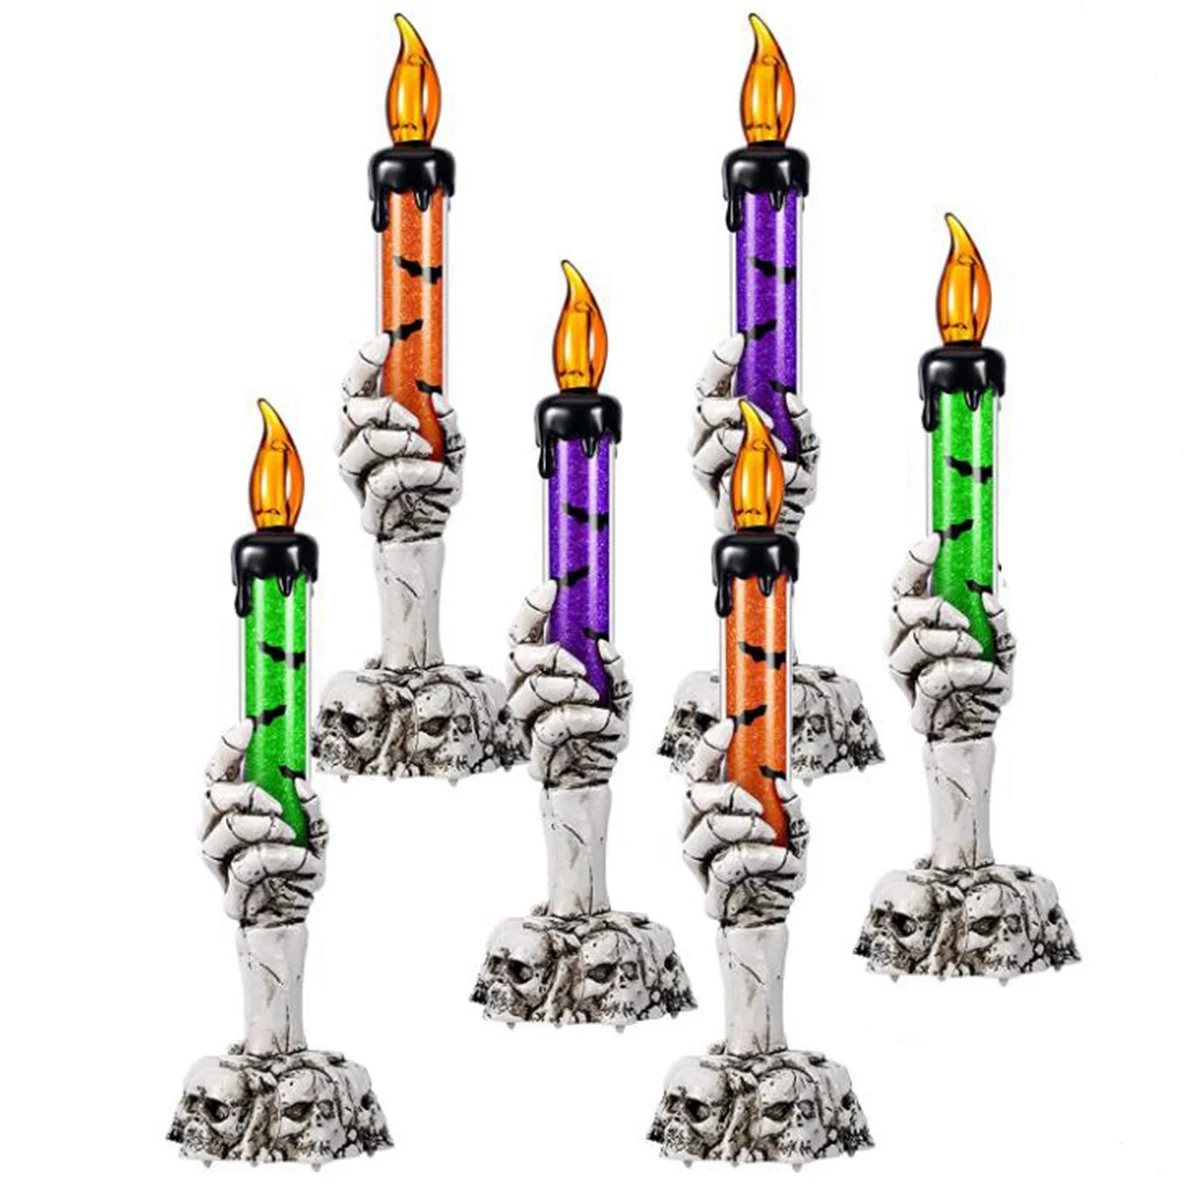 

6 Pack Skeleton Hands Hold Lighted Candle Flameless Skeleton Ghost Hand Halloween Candles Light Up LED Skull Candle Lamp